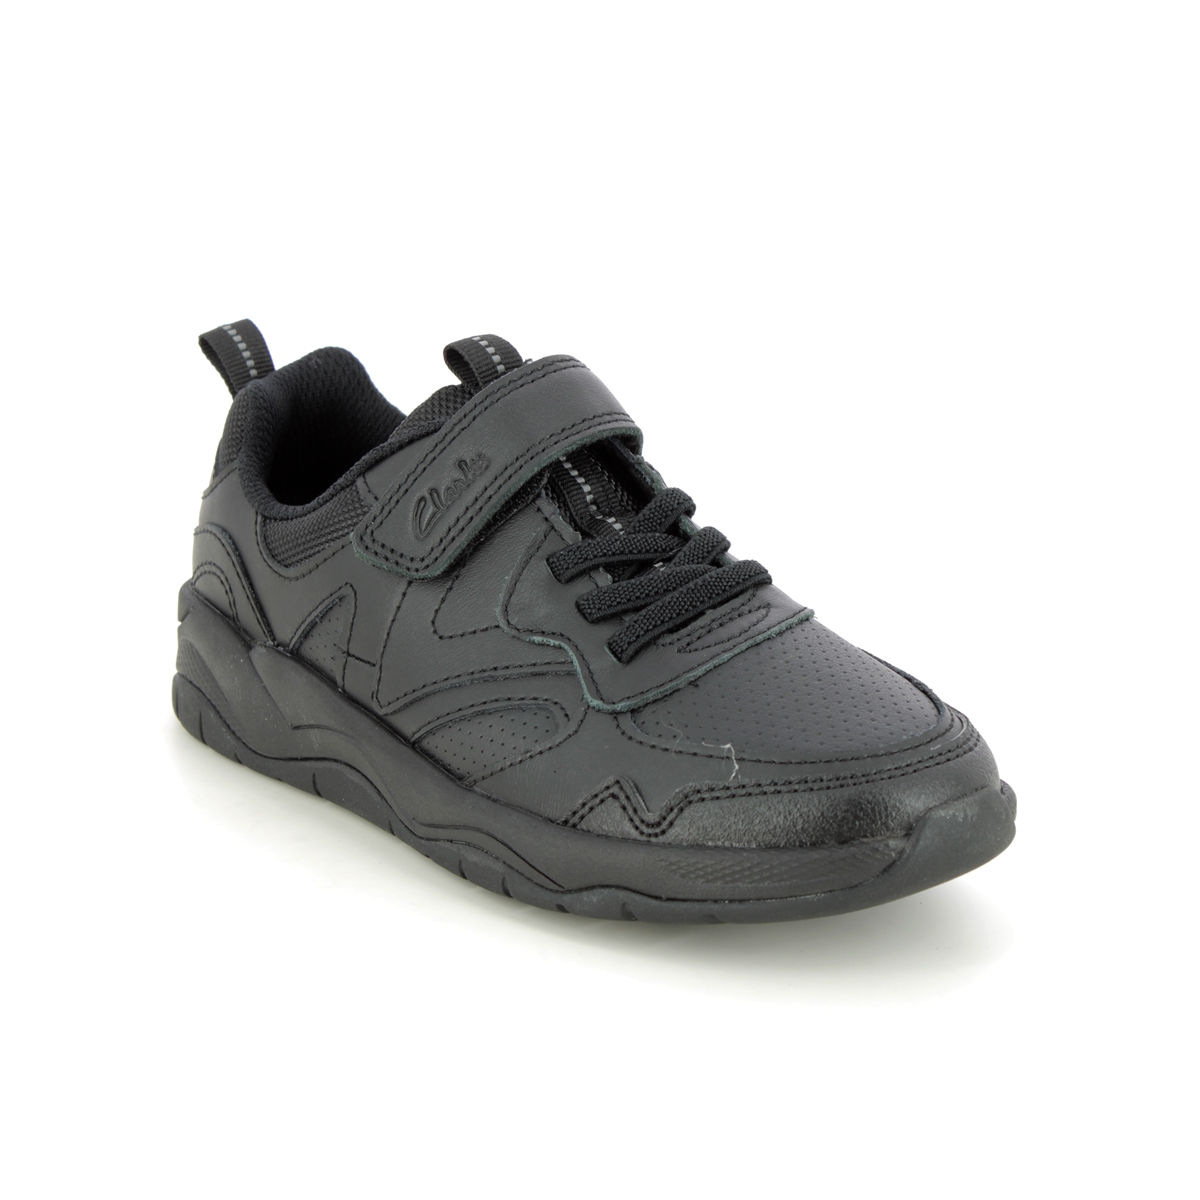 Clarks Clowder Sprint O Black Leather Kids Boys Shoes 661706F In Size 3.5 In Plain Black Leather F Width Fitting Regular Fit For School For kids